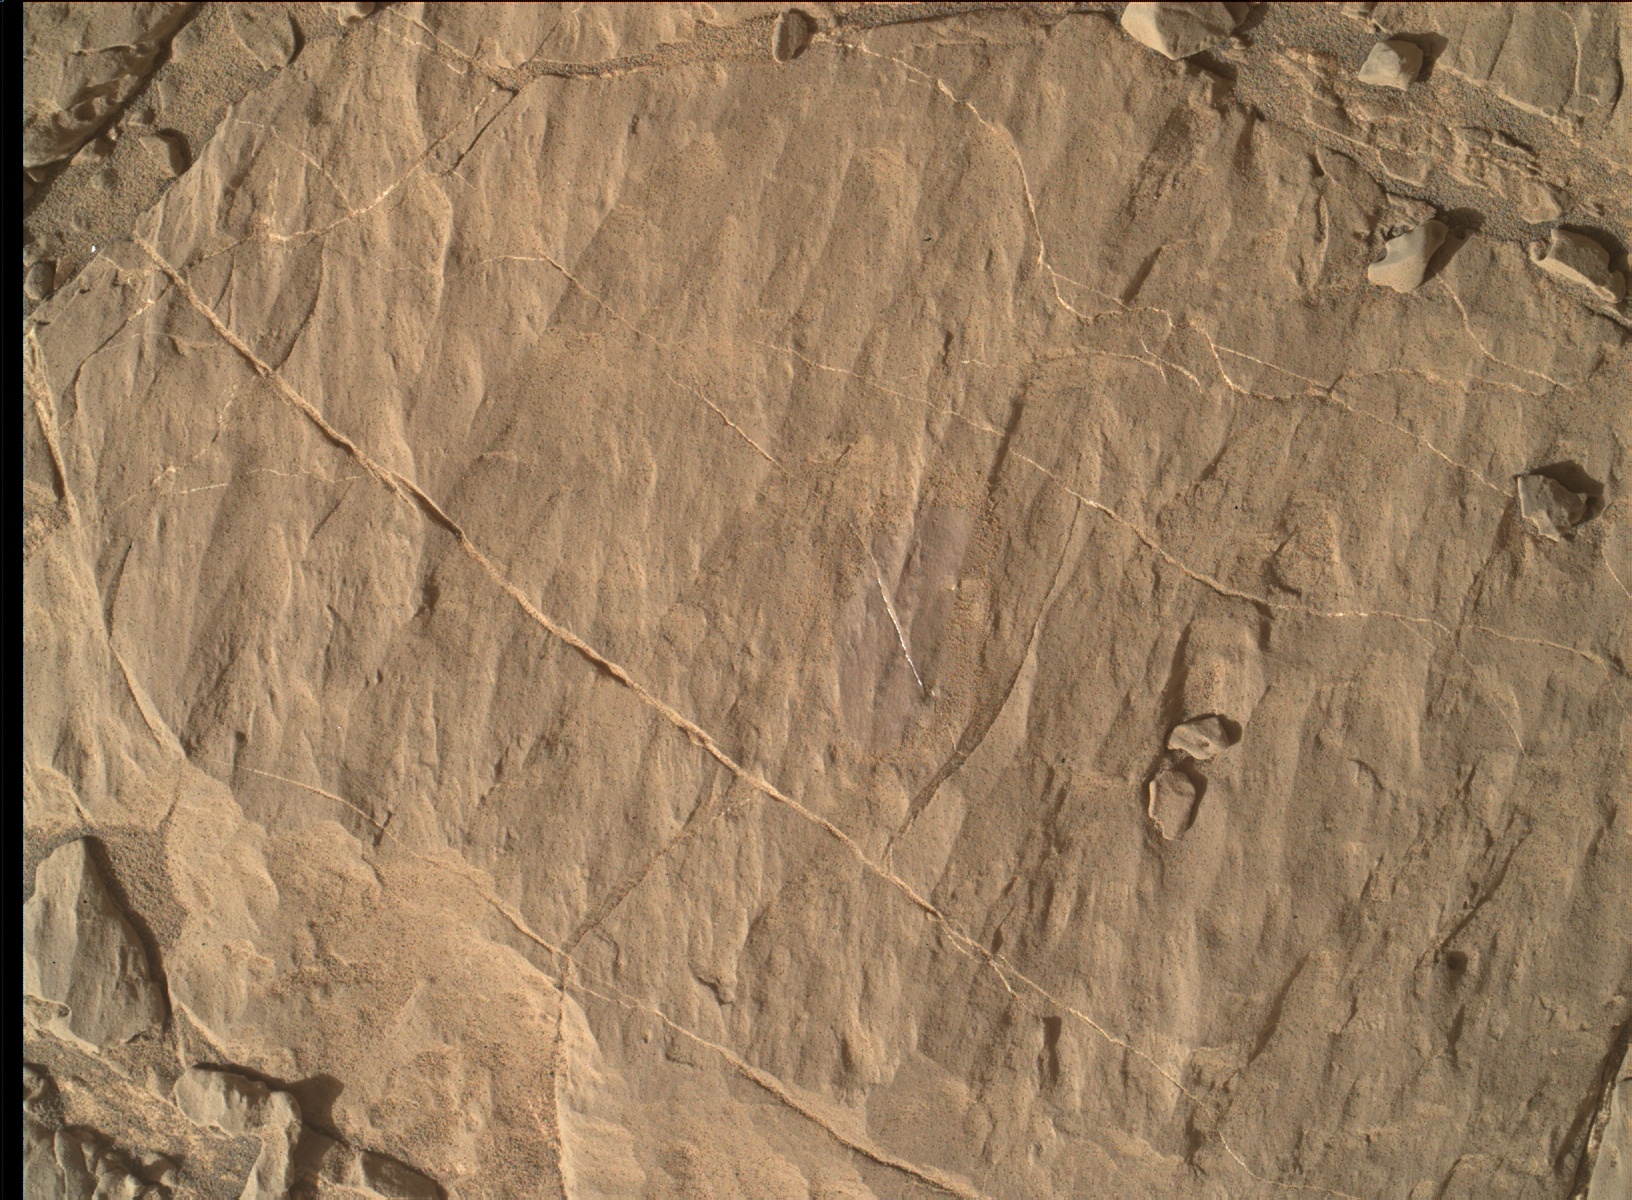 Nasa's Mars rover Curiosity acquired this image using its Mars Hand Lens Imager (MAHLI) on Sol 1836